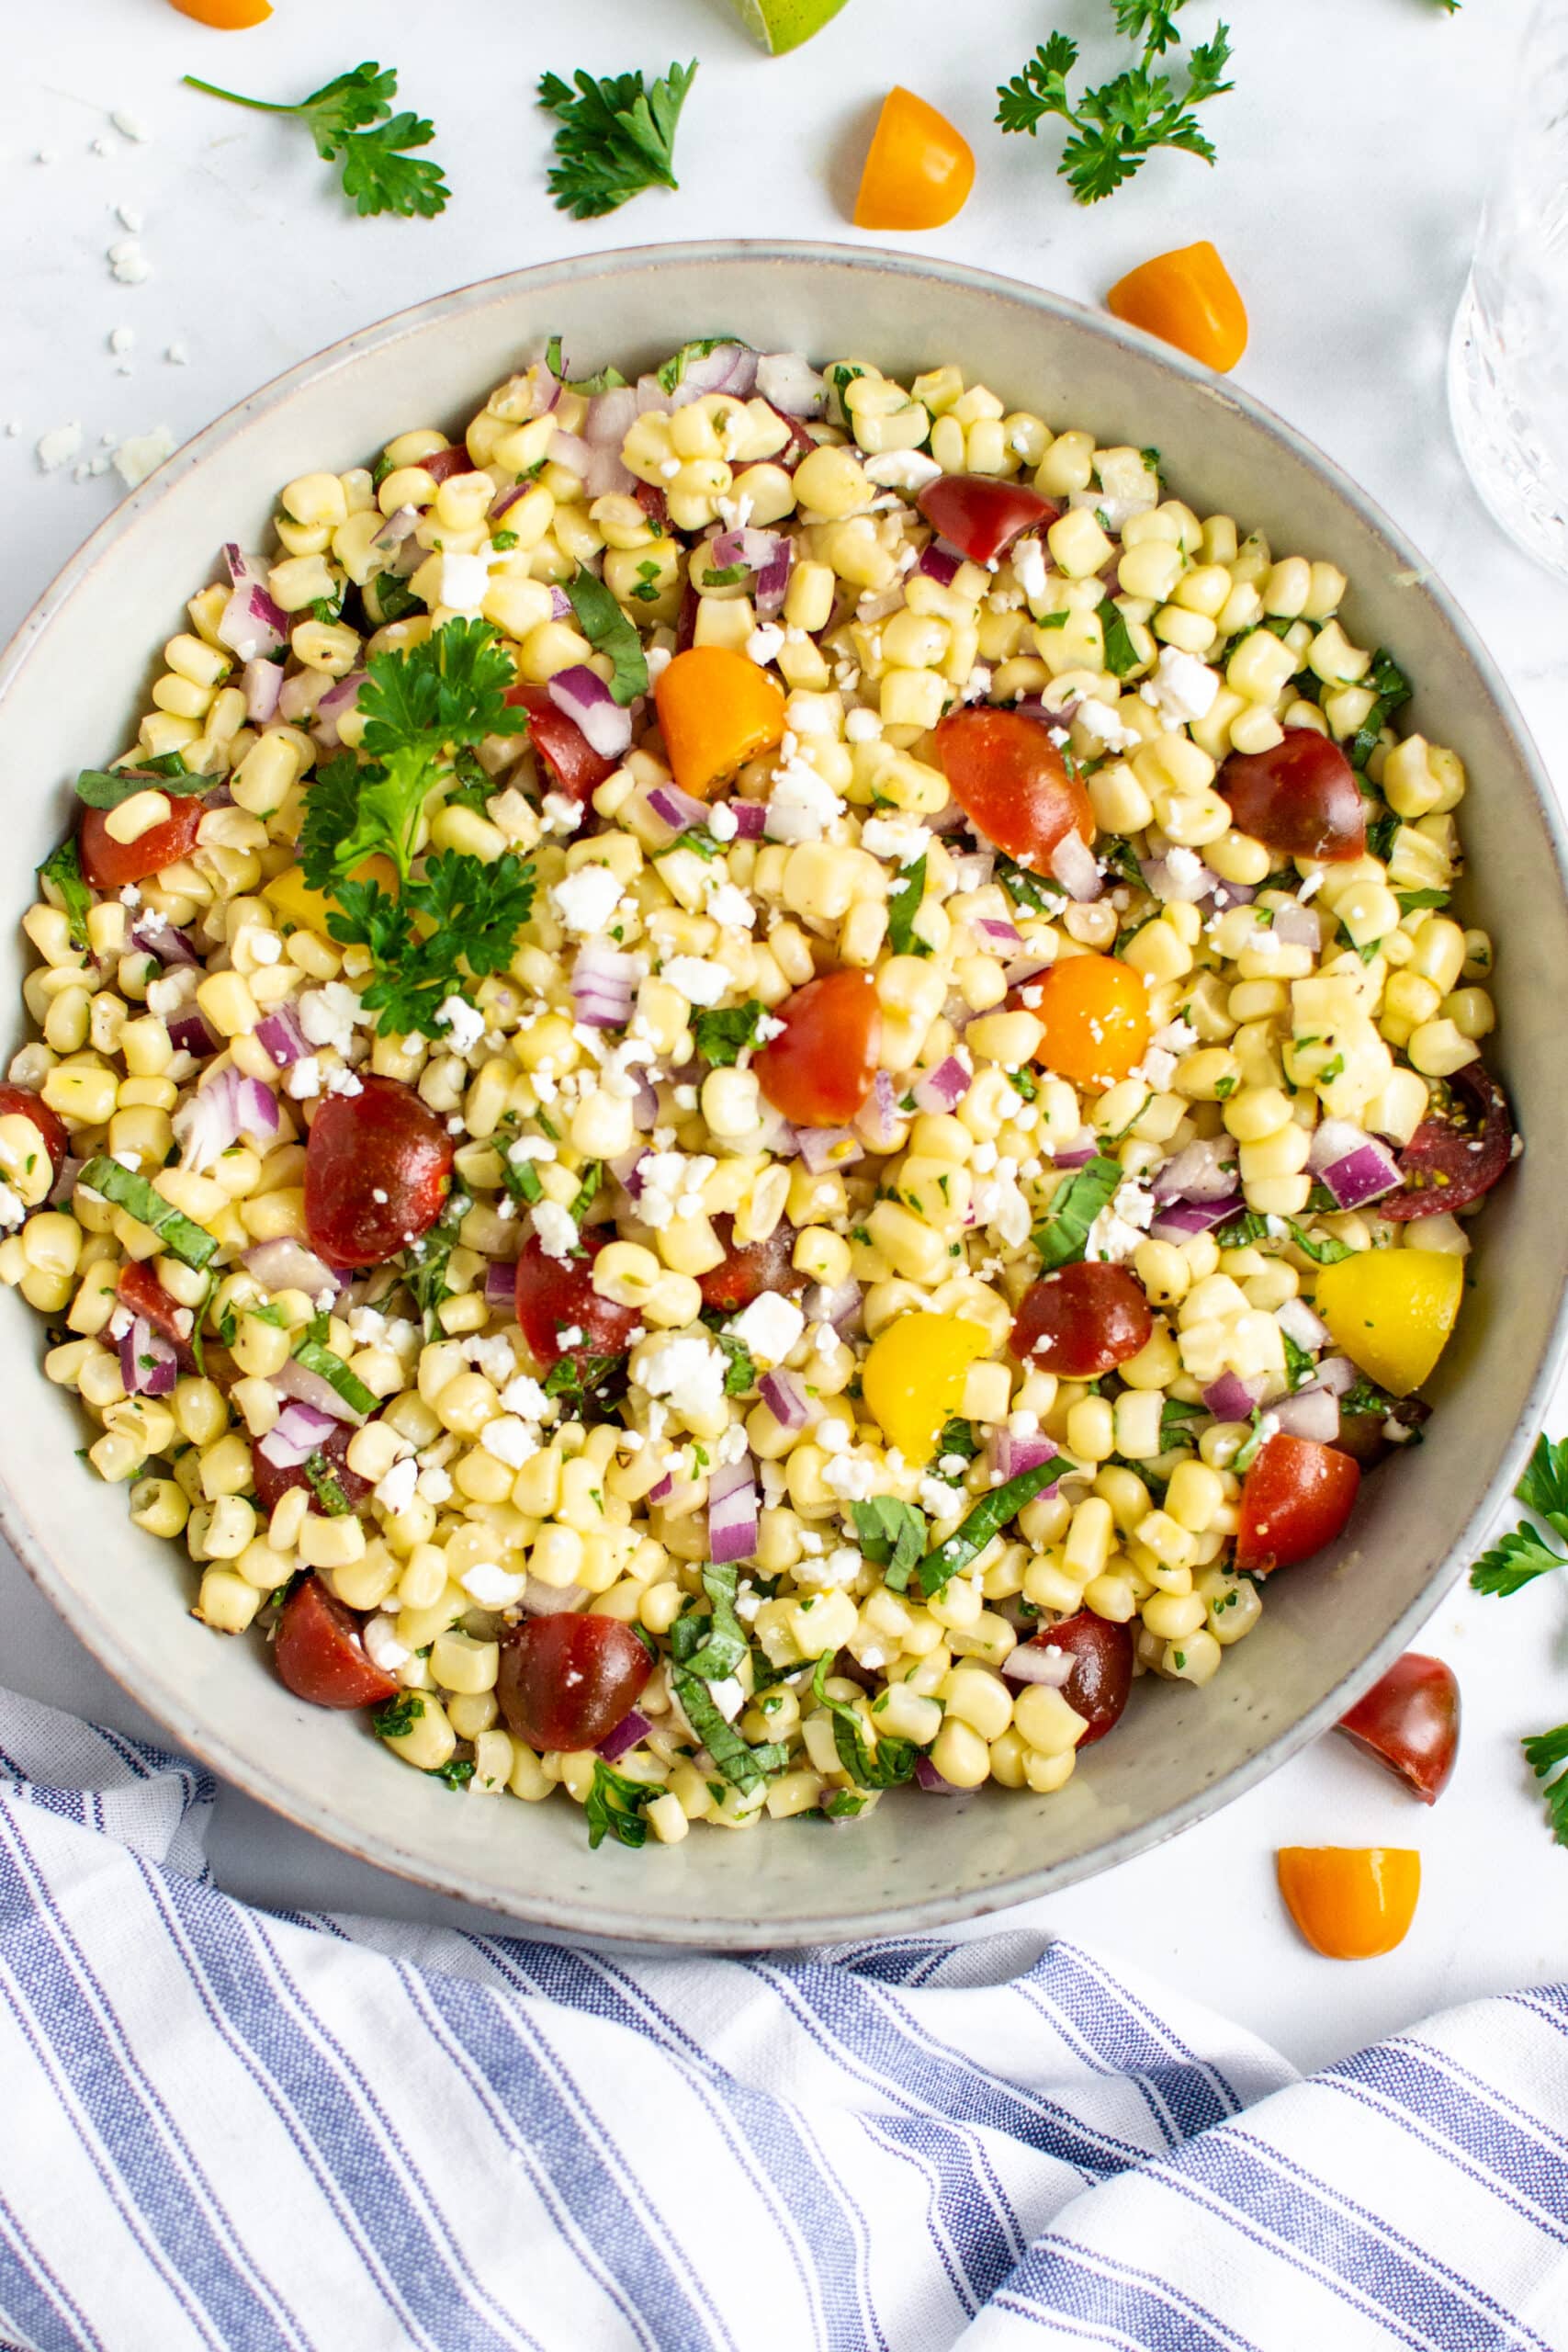 Corn salad with tomatoes in a bowl with feta cheese.